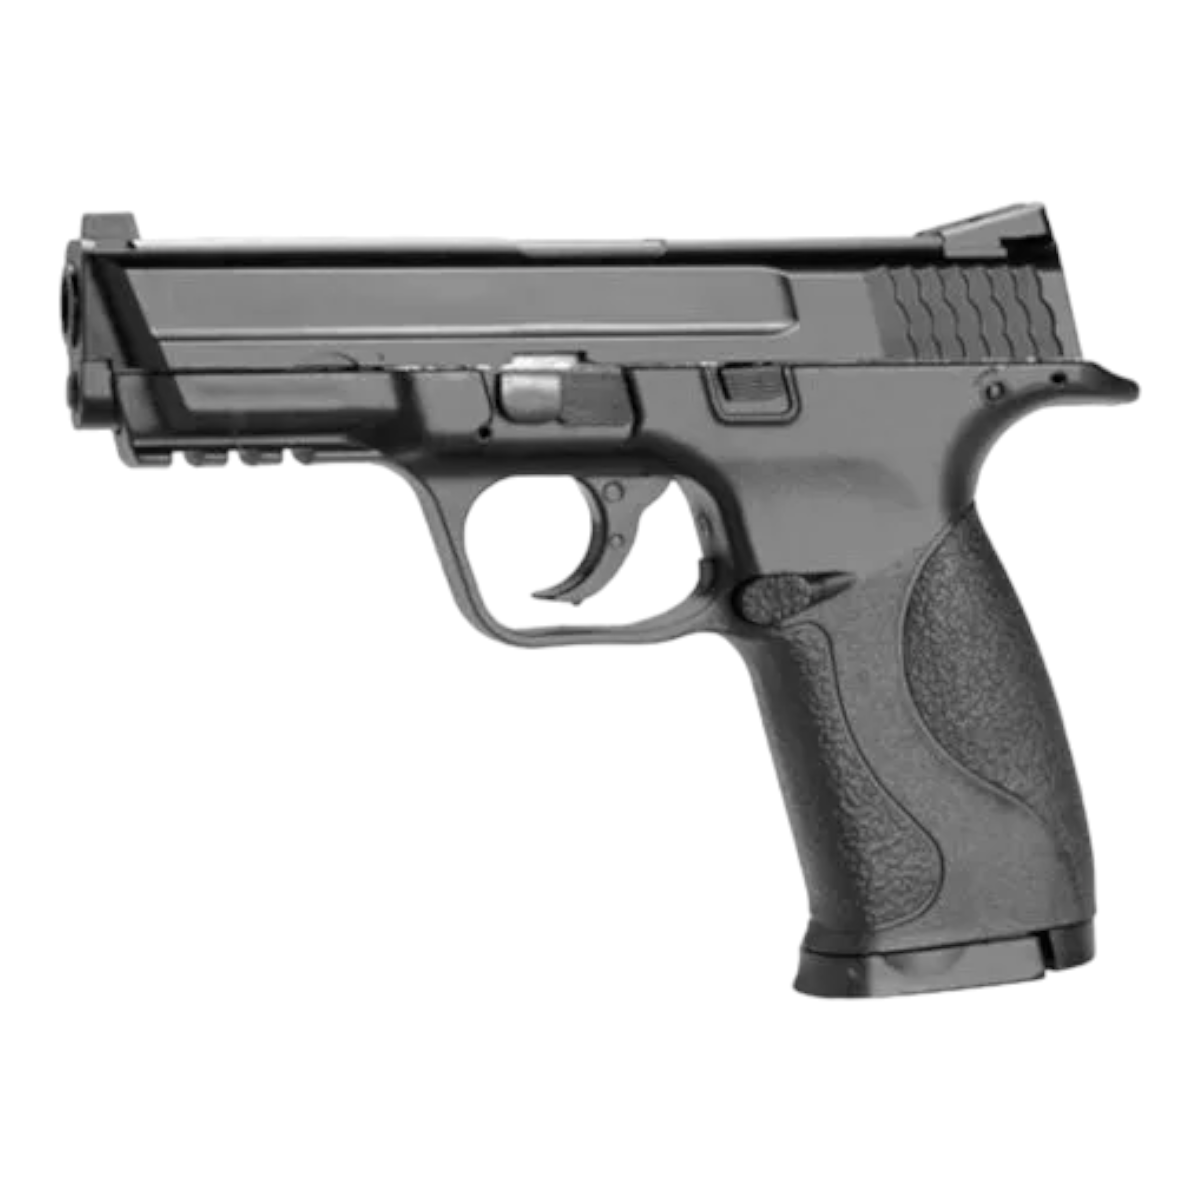 Smith & Wesson Mp40 Polimero +10co2+500balines ARC16